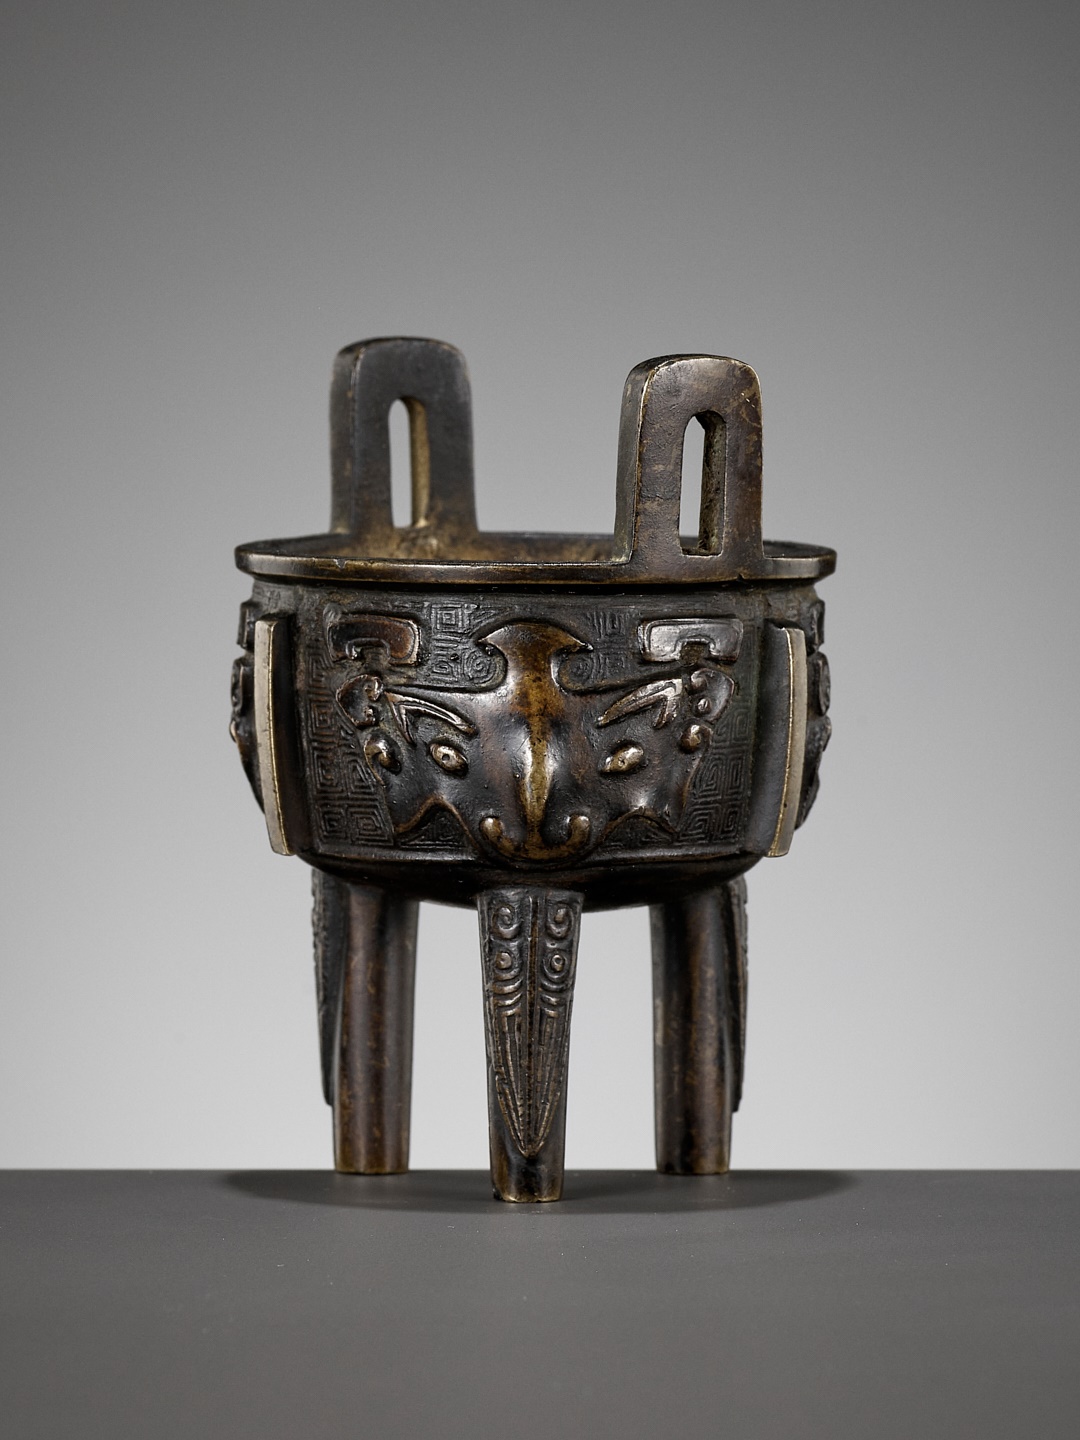 A BRONZE ARCHAISTIC MINIATURE TRIPOD CENSER, DING, QING DYNASTY, 17TH CENTURY